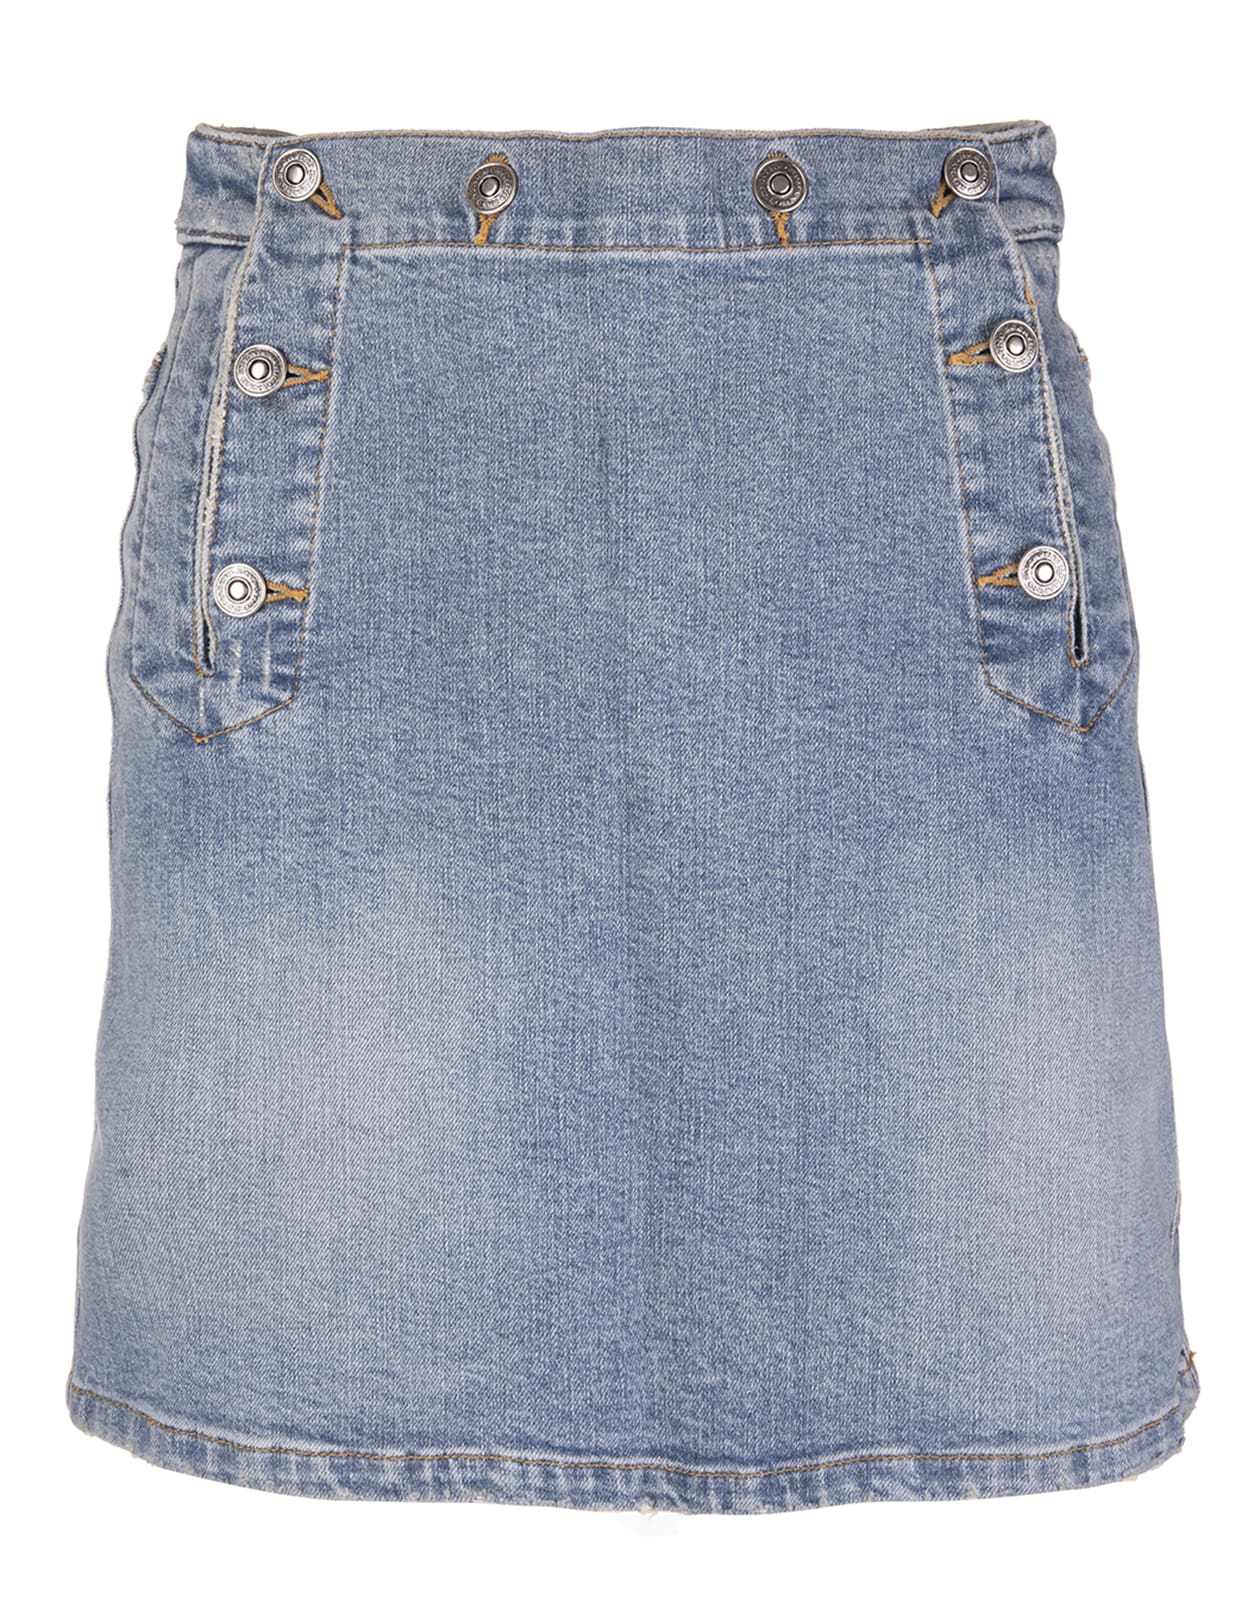 Ermanno Scervino Denim Mini Skirt With Buttons